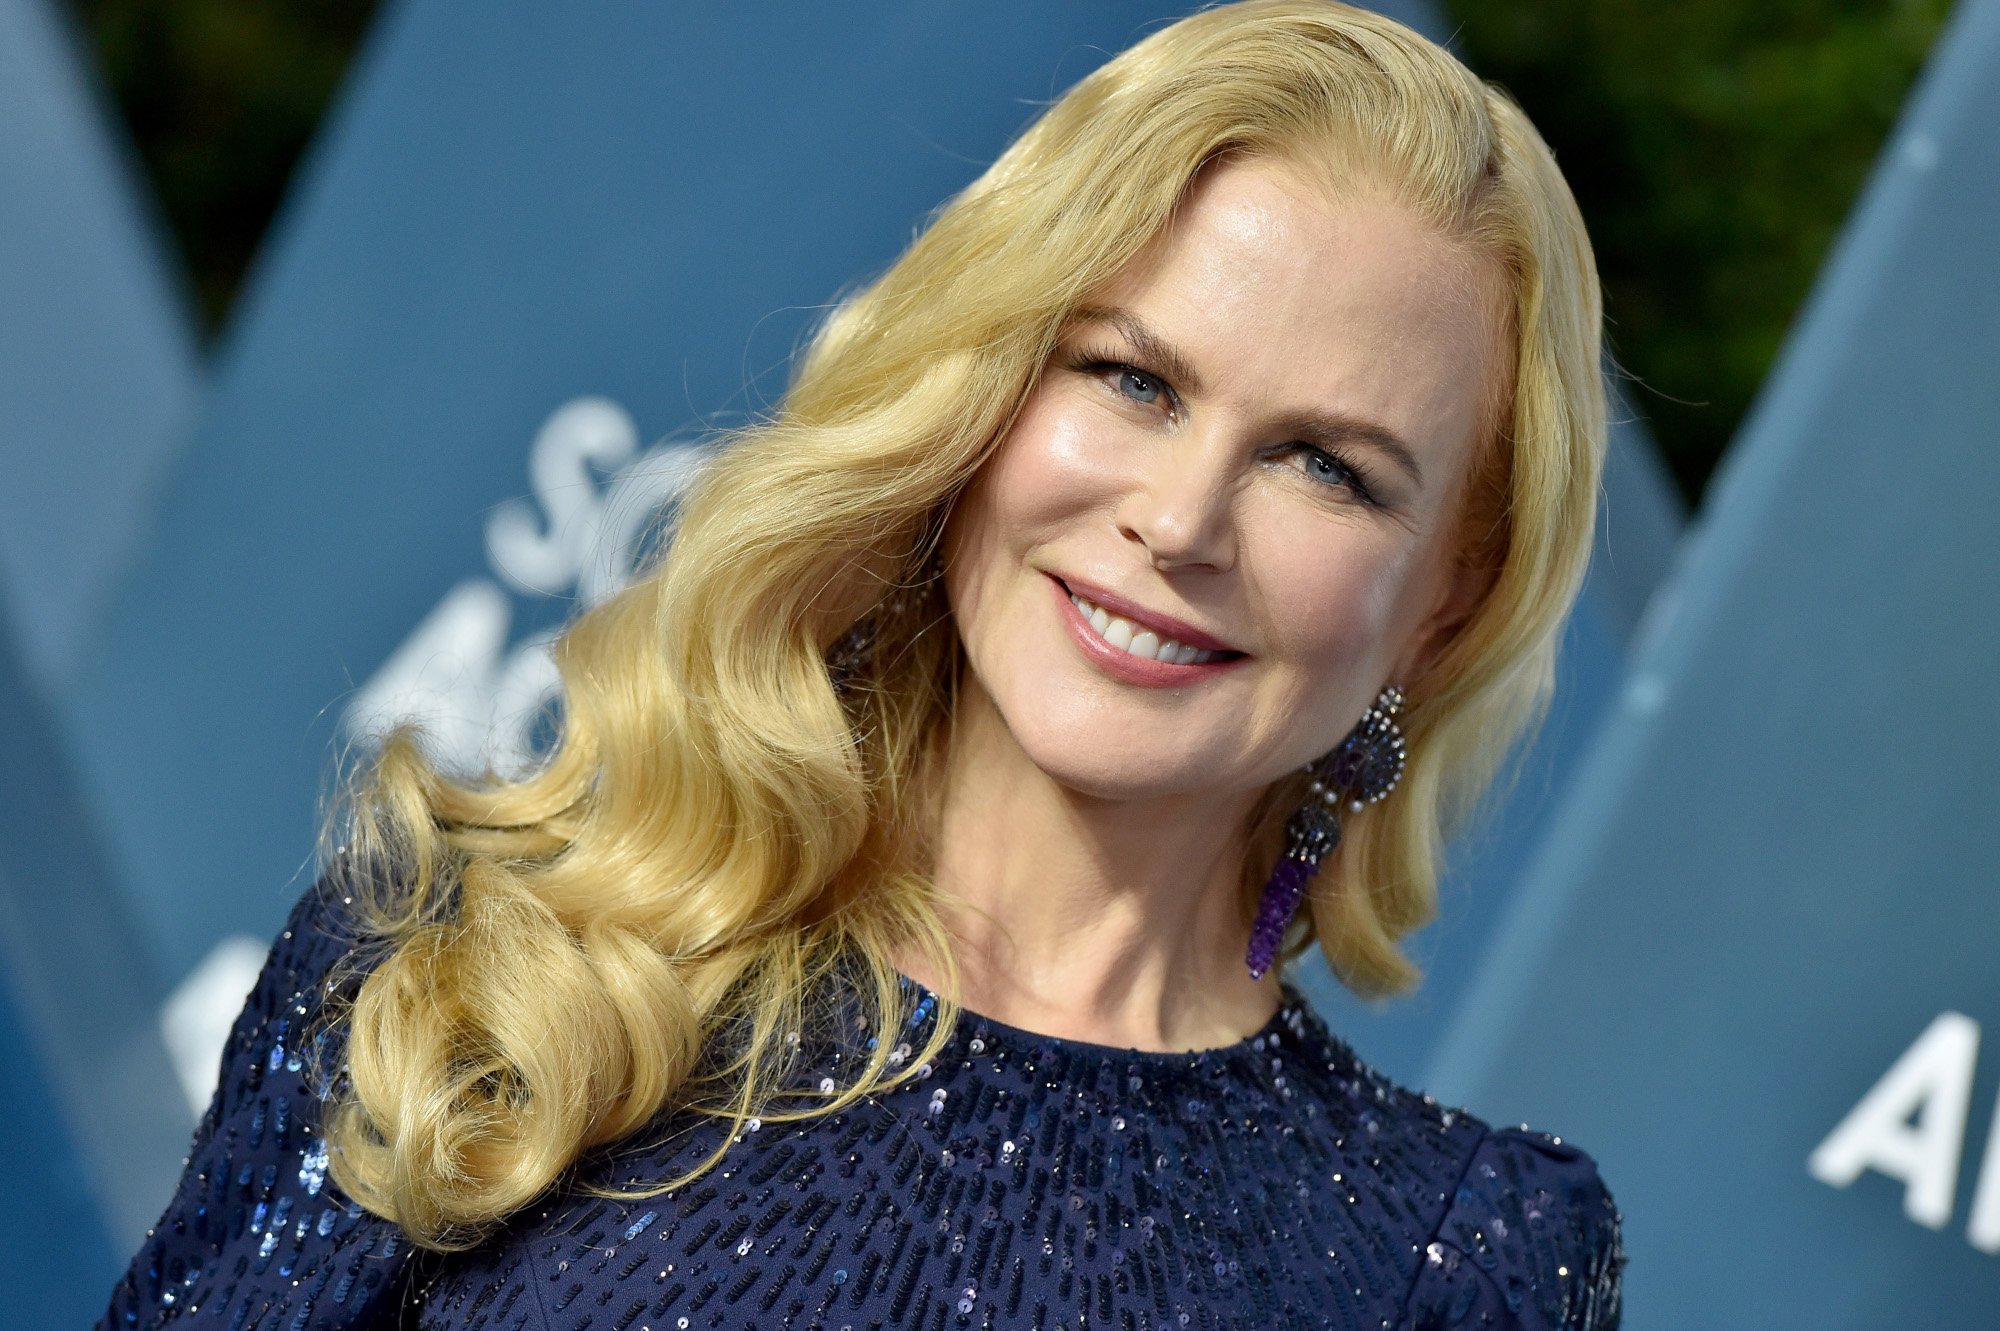 'Nine Perfect Strangers' star Nicole Kidman on the red carpet for the 26th Annual Screen Actors Guild Awards. Her blonde hair is down and curled, and she's smiling. She's wearing a dark blue, sequined dress that covers her shoulders and chest. Does she have the highest net worth among her Hulu costars?